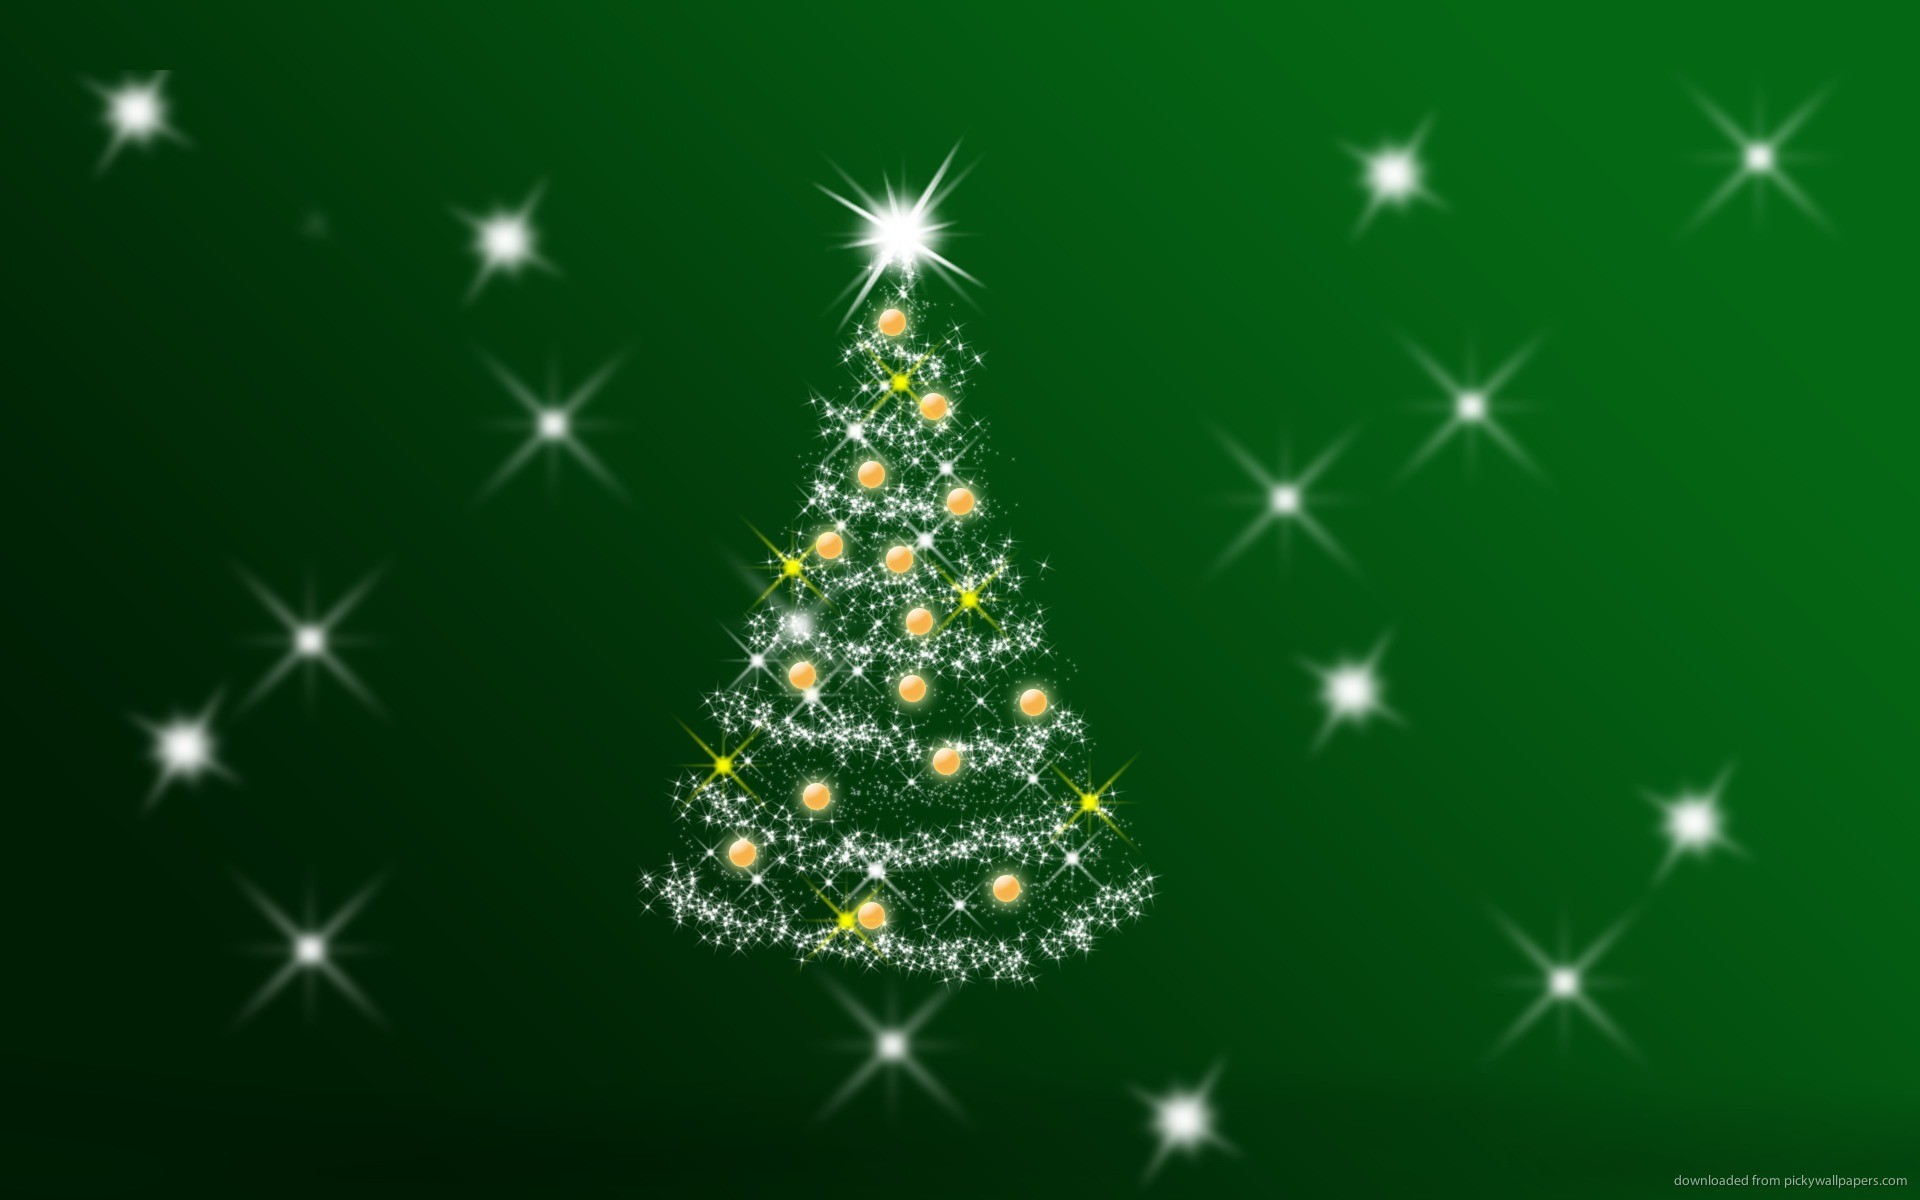 1920x1200 wallpaper.pickywallpapers.com//green christmas background